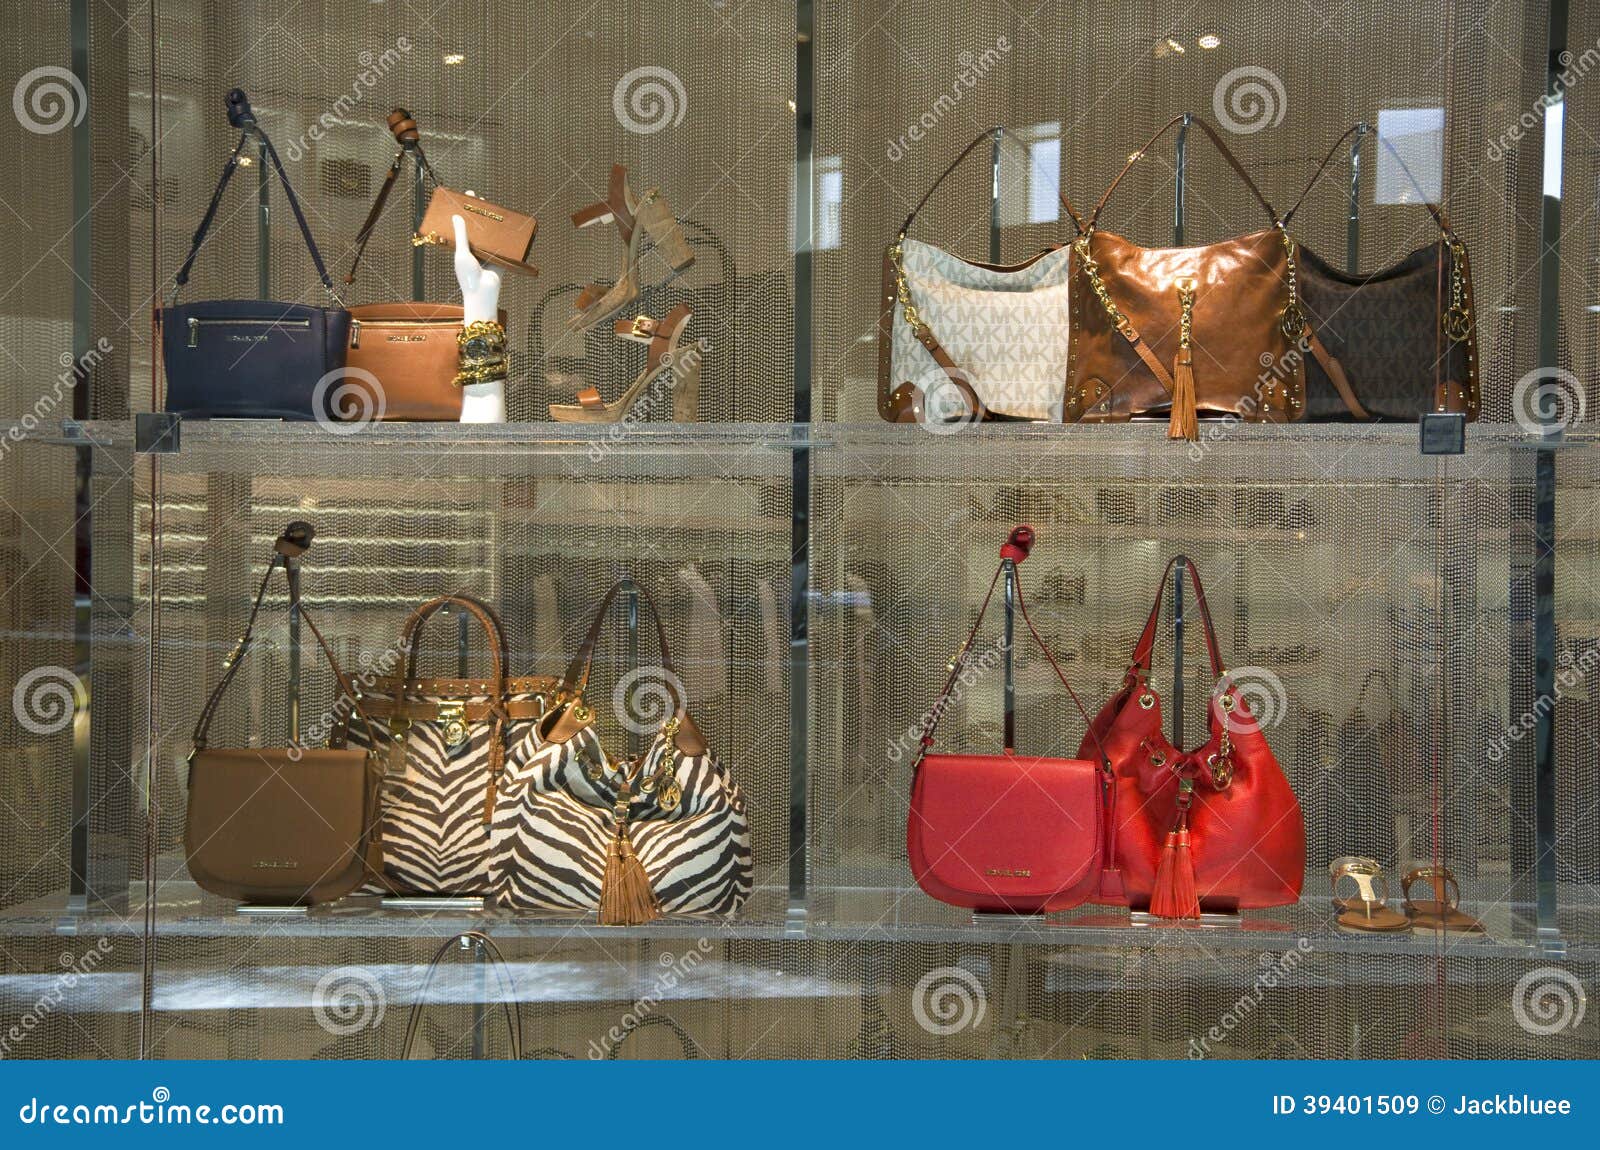 Michael kors purse store editorial stock image. Image of famous - 39401509